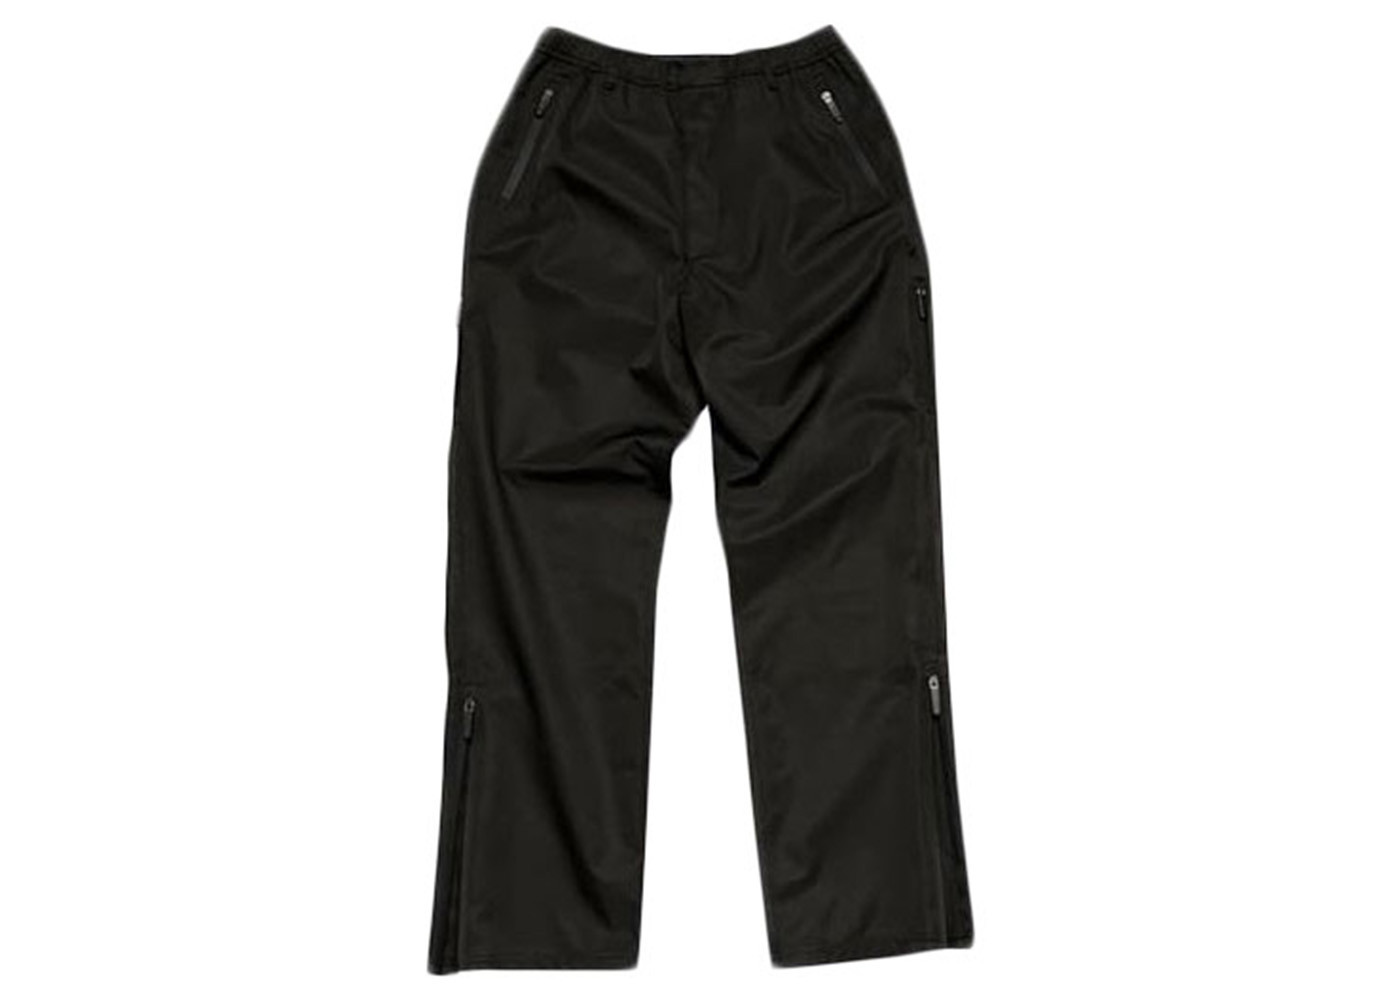 Free Planet Womens Pants On Sale Up To 90 Off Retail  thredUP